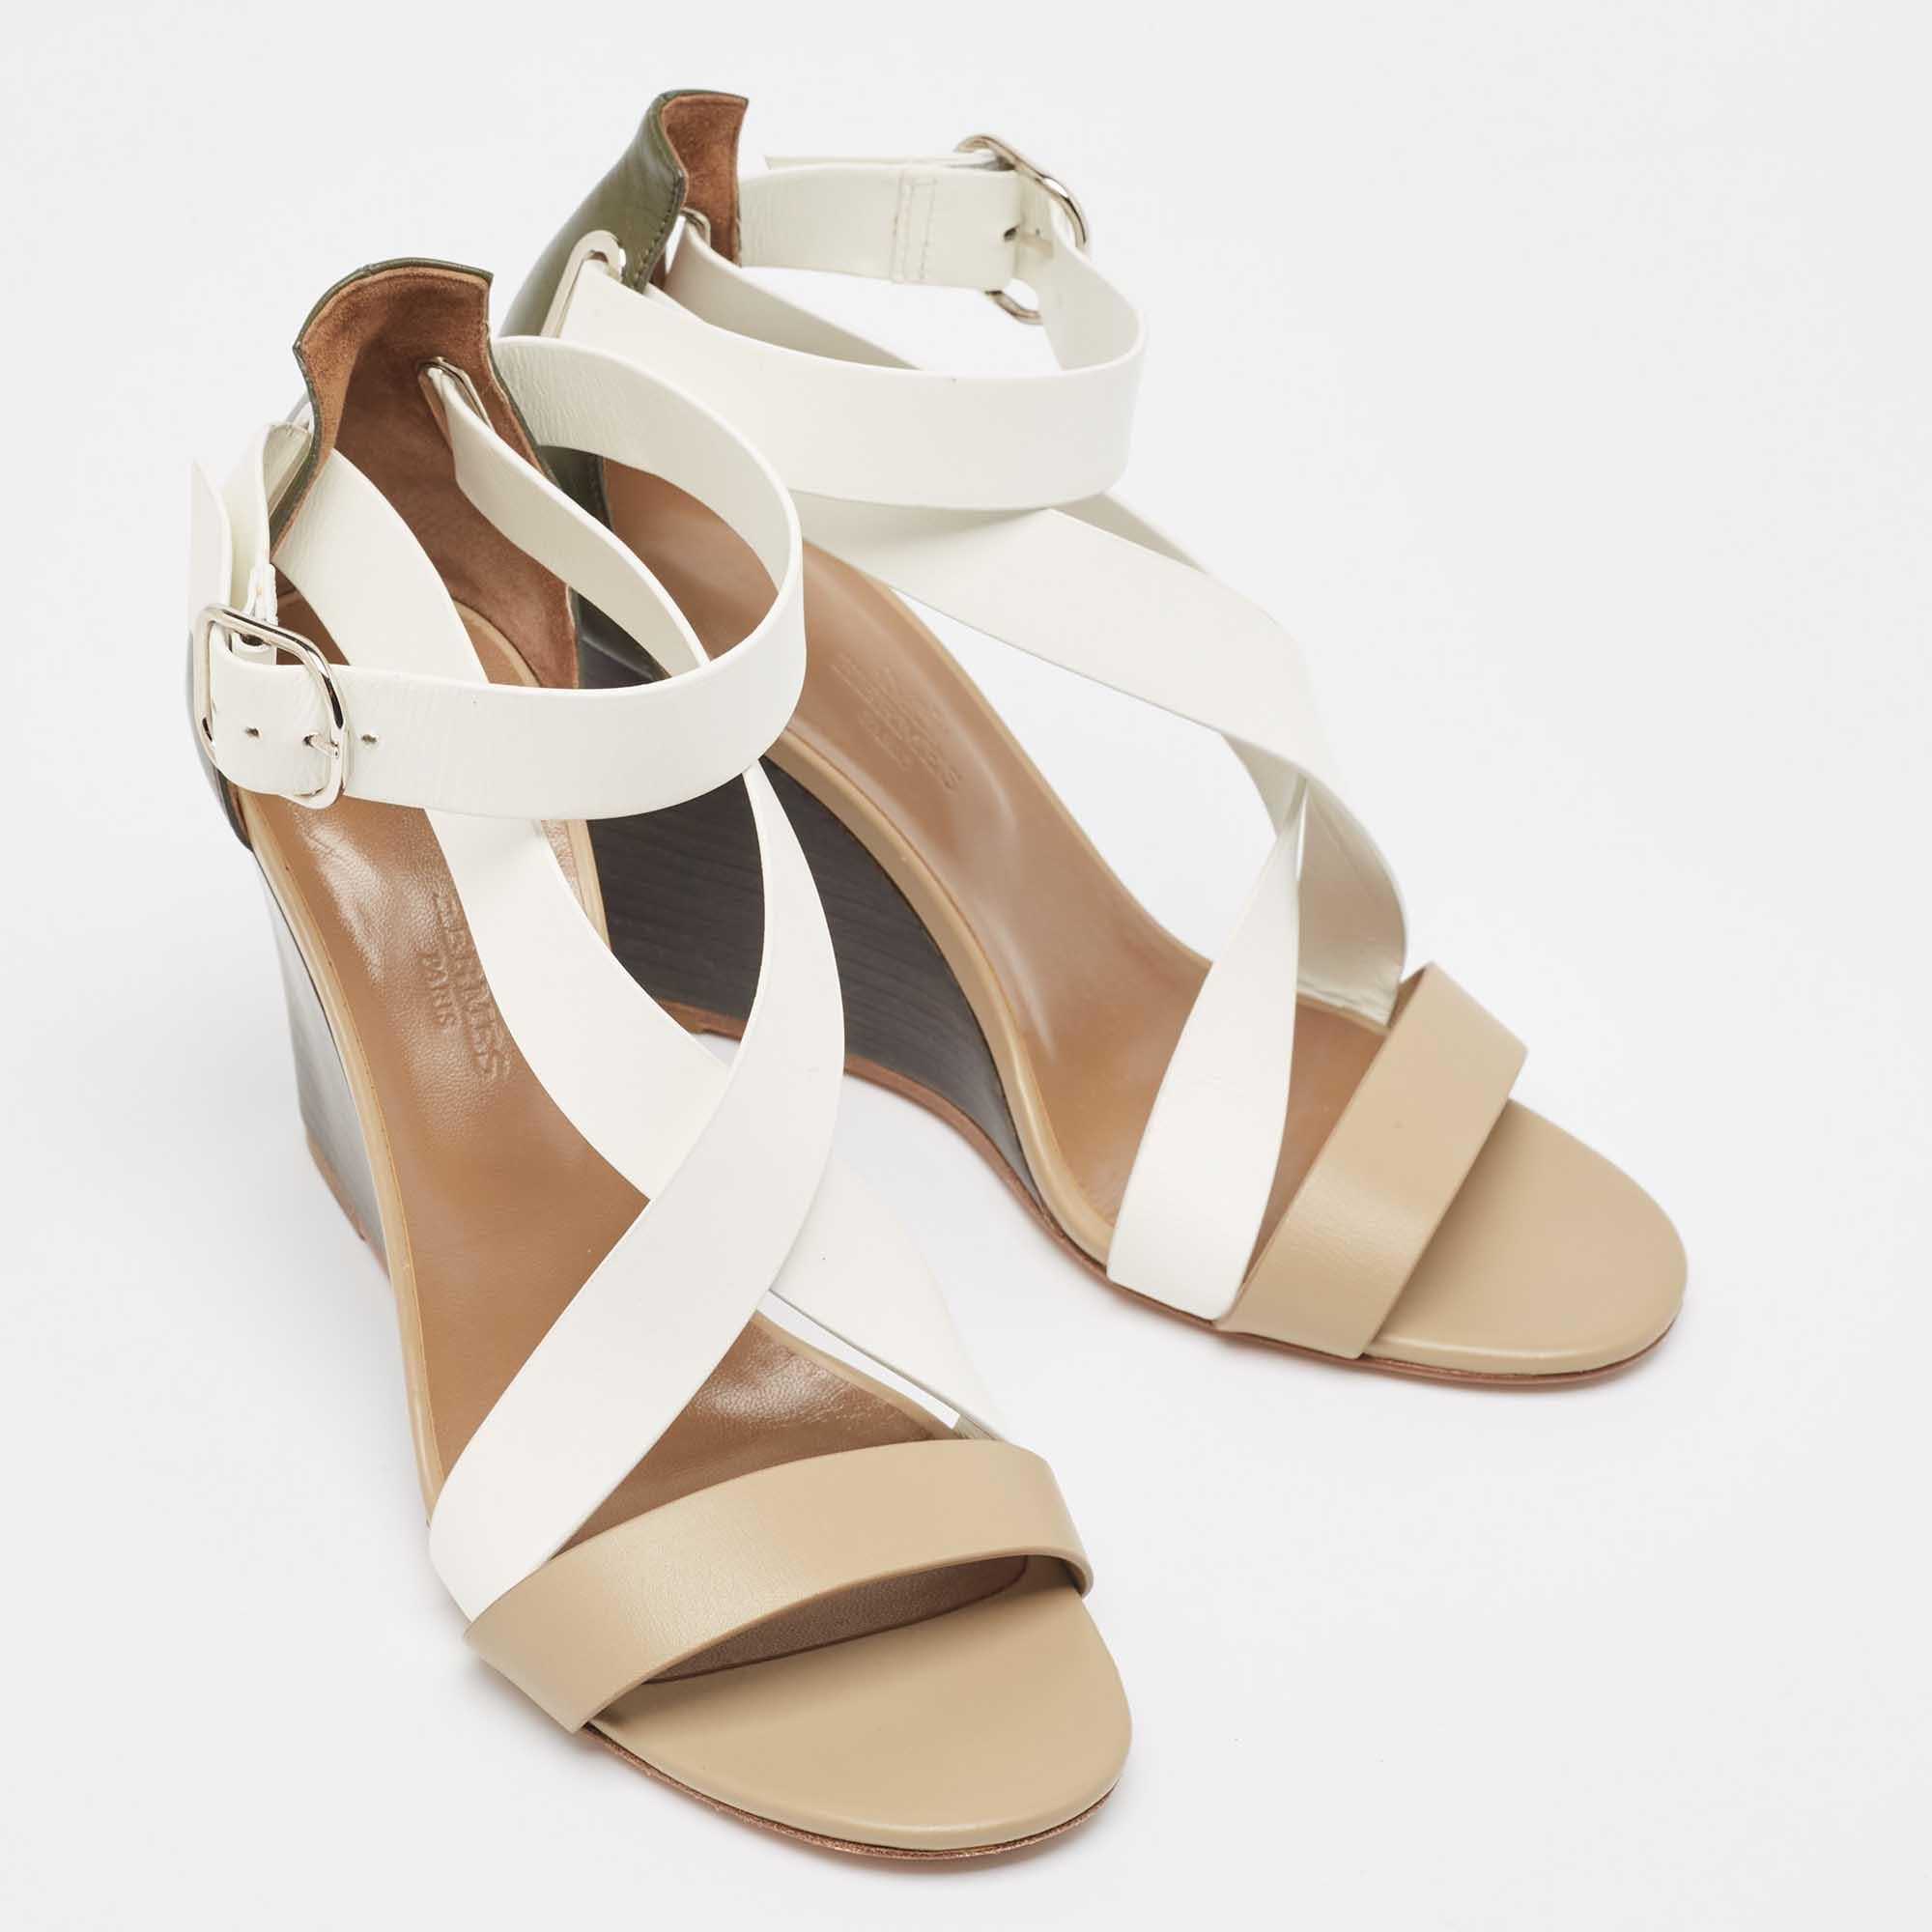 Hermes Tricolor Leather Ankle Wrap Wedge Sandals Size 38.5 In Good Condition For Sale In Dubai, Al Qouz 2